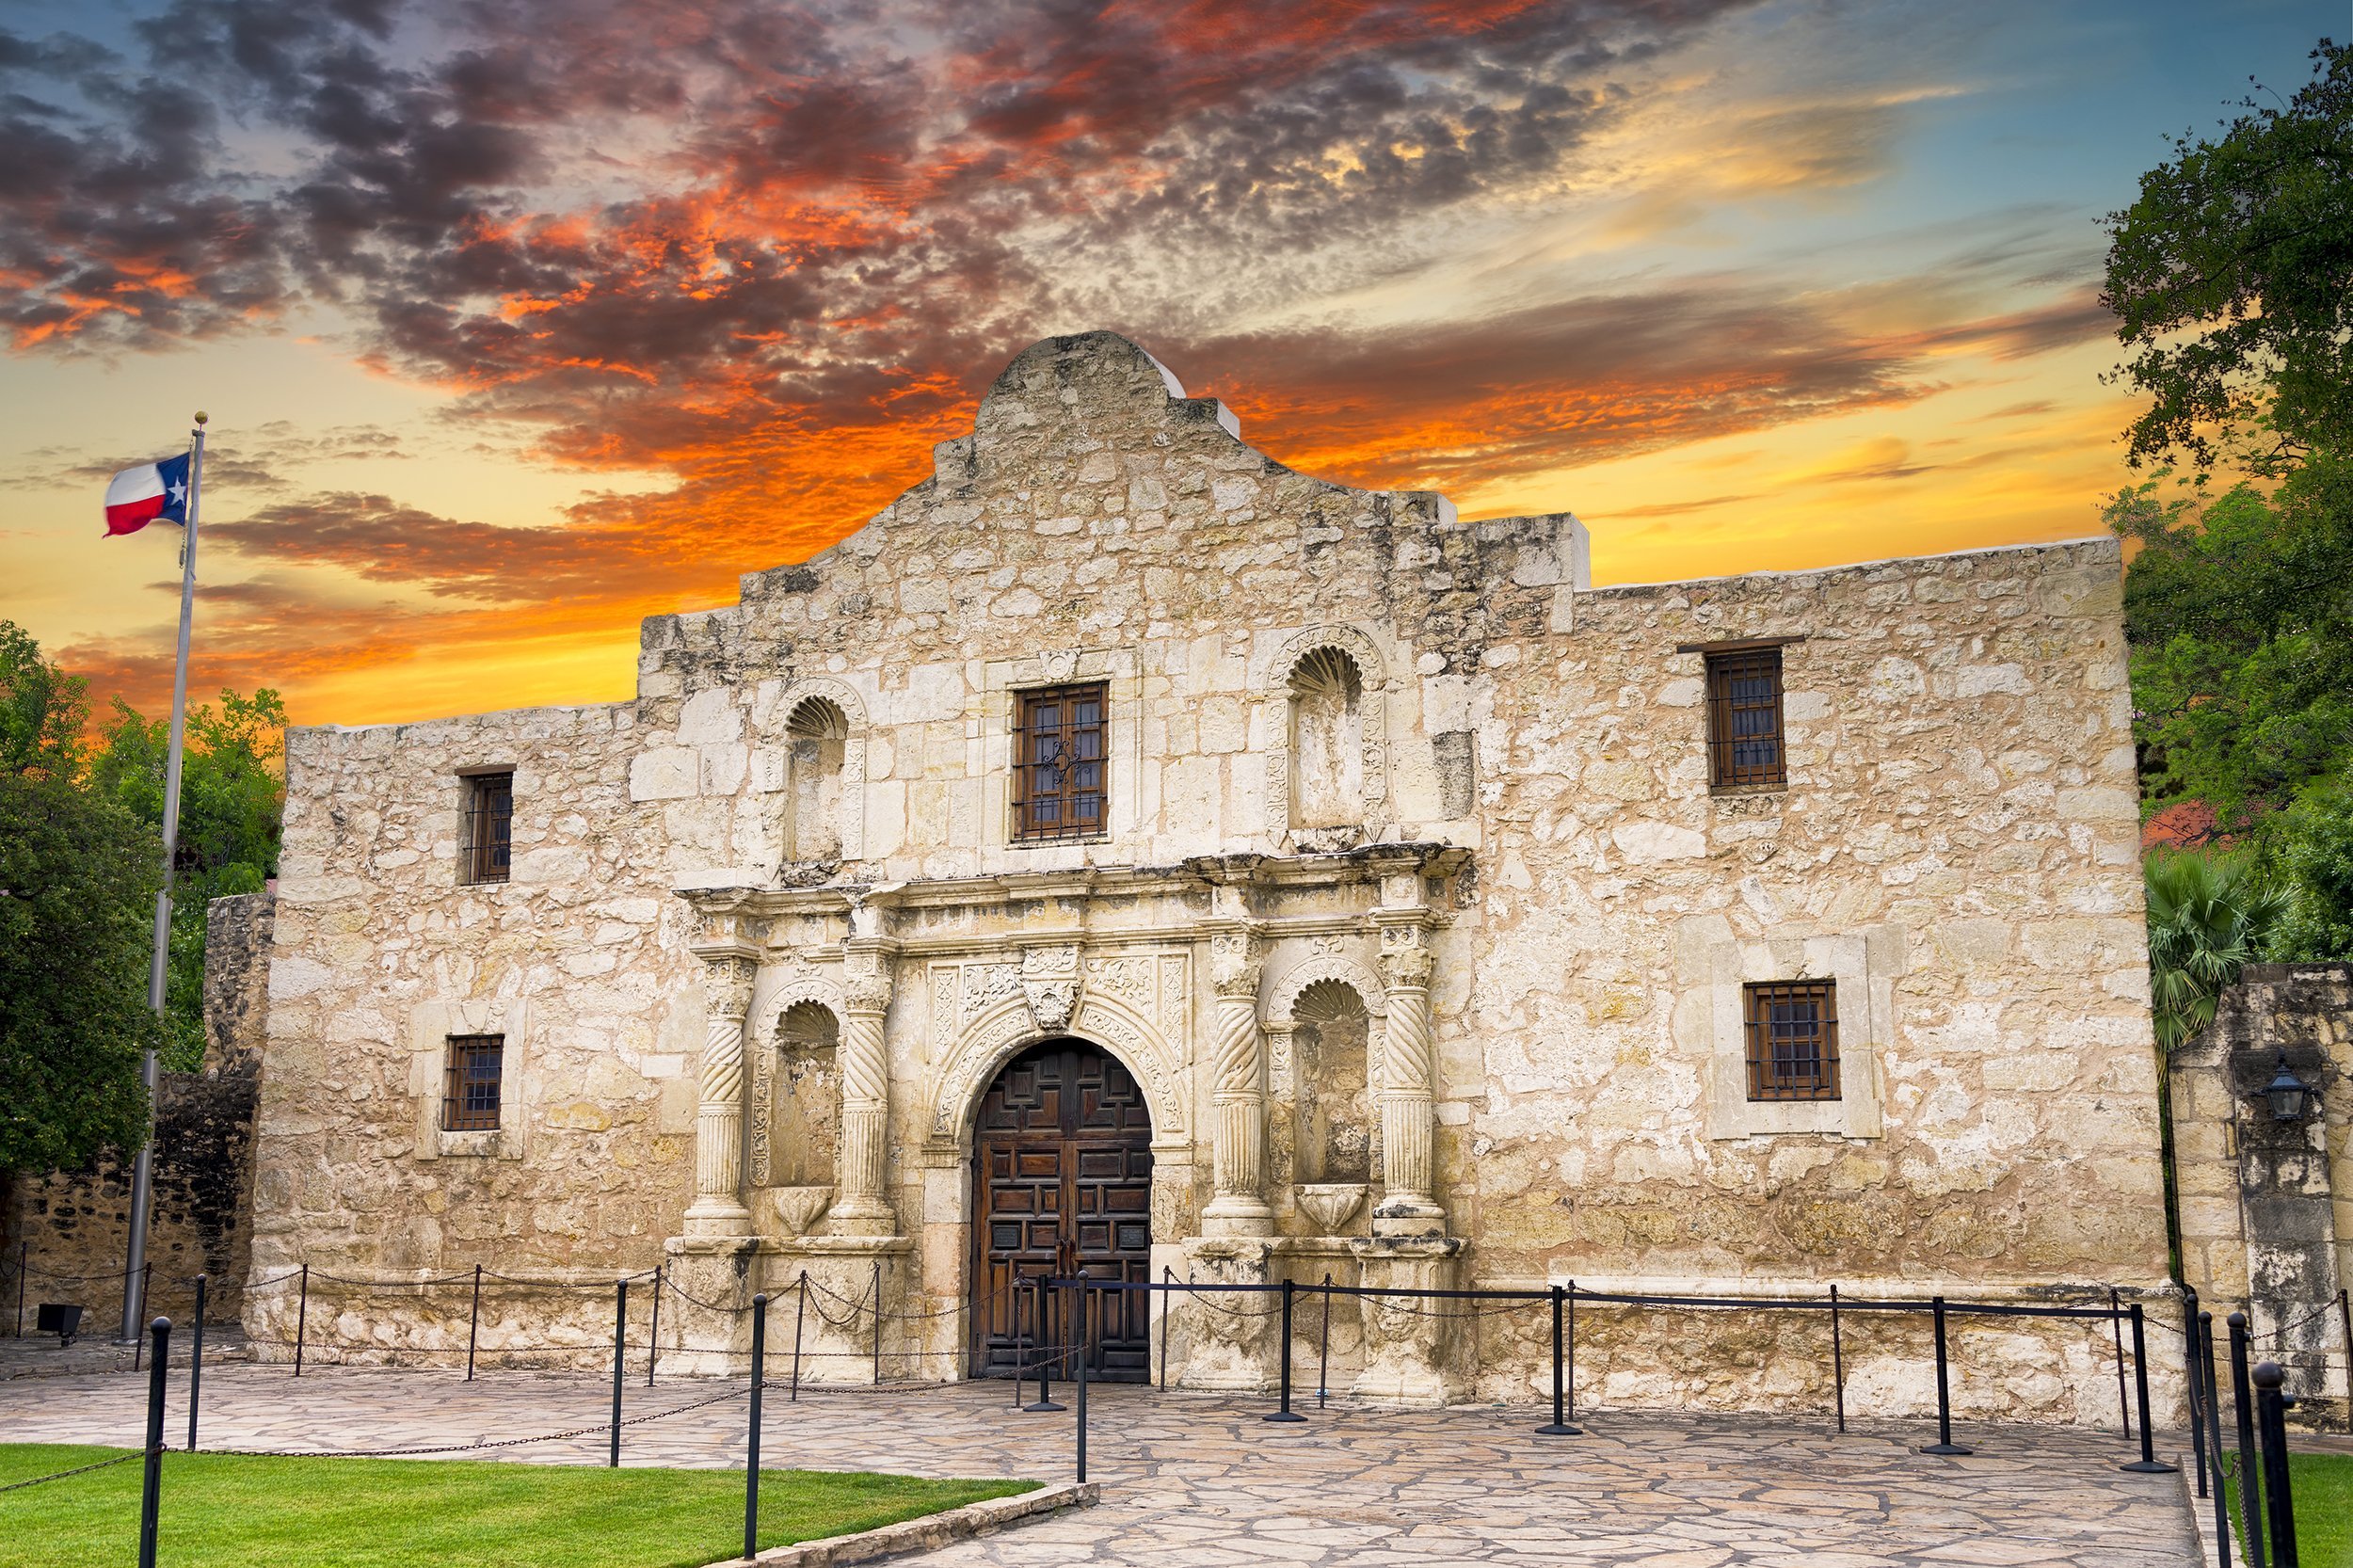 <p><em>San Antonio</em> <br>If your knowledge of <a href="http://www.thealamo.org">the Alamo</a> begins and ends with "Pee-Wee's Big Adventure," it's time for a history lesson. Since 1906, this one-time mission now managed by the Texas General Land Office stands as a testament to the mission and fort's vital role in defending freedom.</p><p>Want to see what the Alamo looks like up-close? Check out <a href="https://blog.cheapism.com/historic-sites-virtual-tours/">31 Historic Places Across America That You Can Tour Virtually</a>.</p>